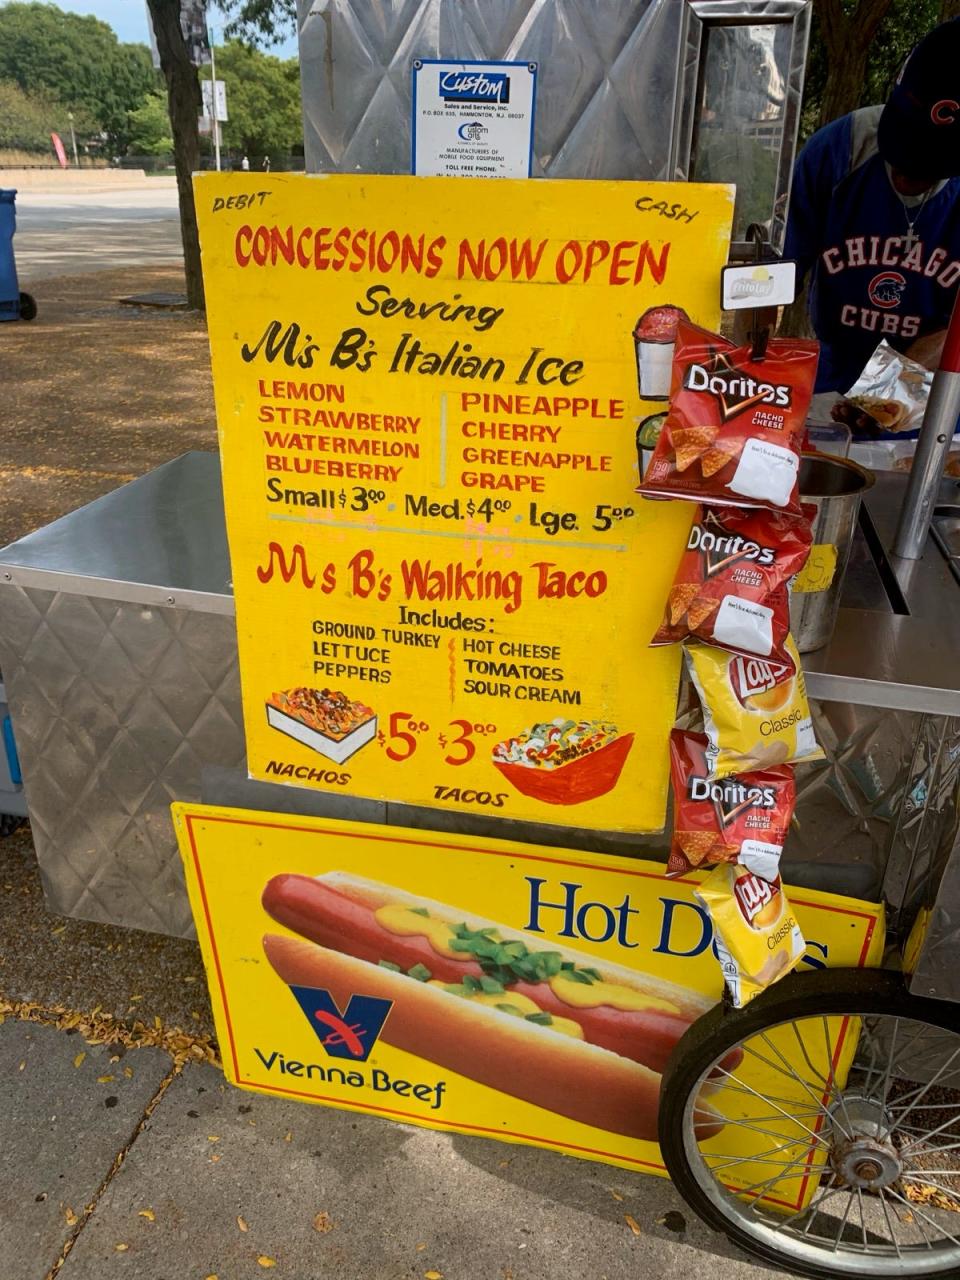 Chicago food cart selling hot dogs.